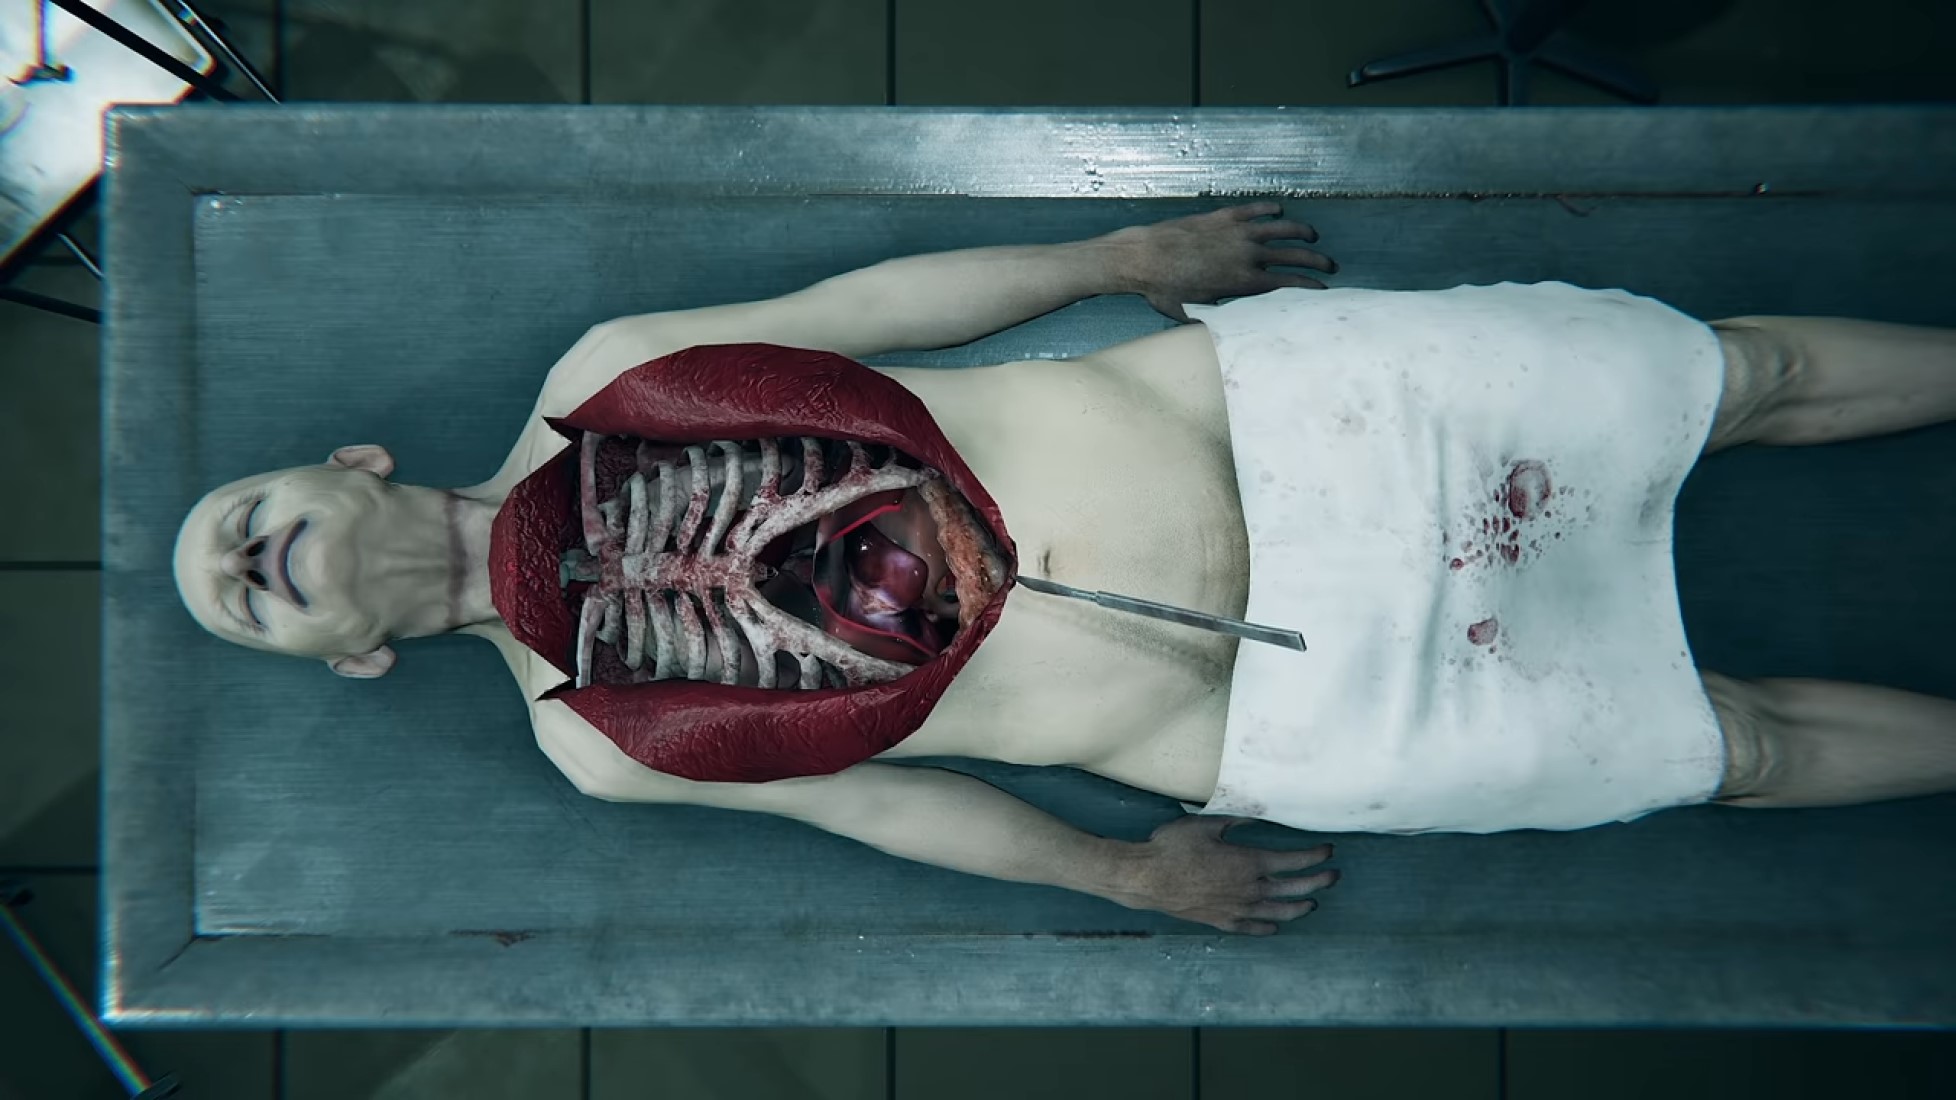 Autopsy Simulator Trailer Shows That Simulations Can Be Scar